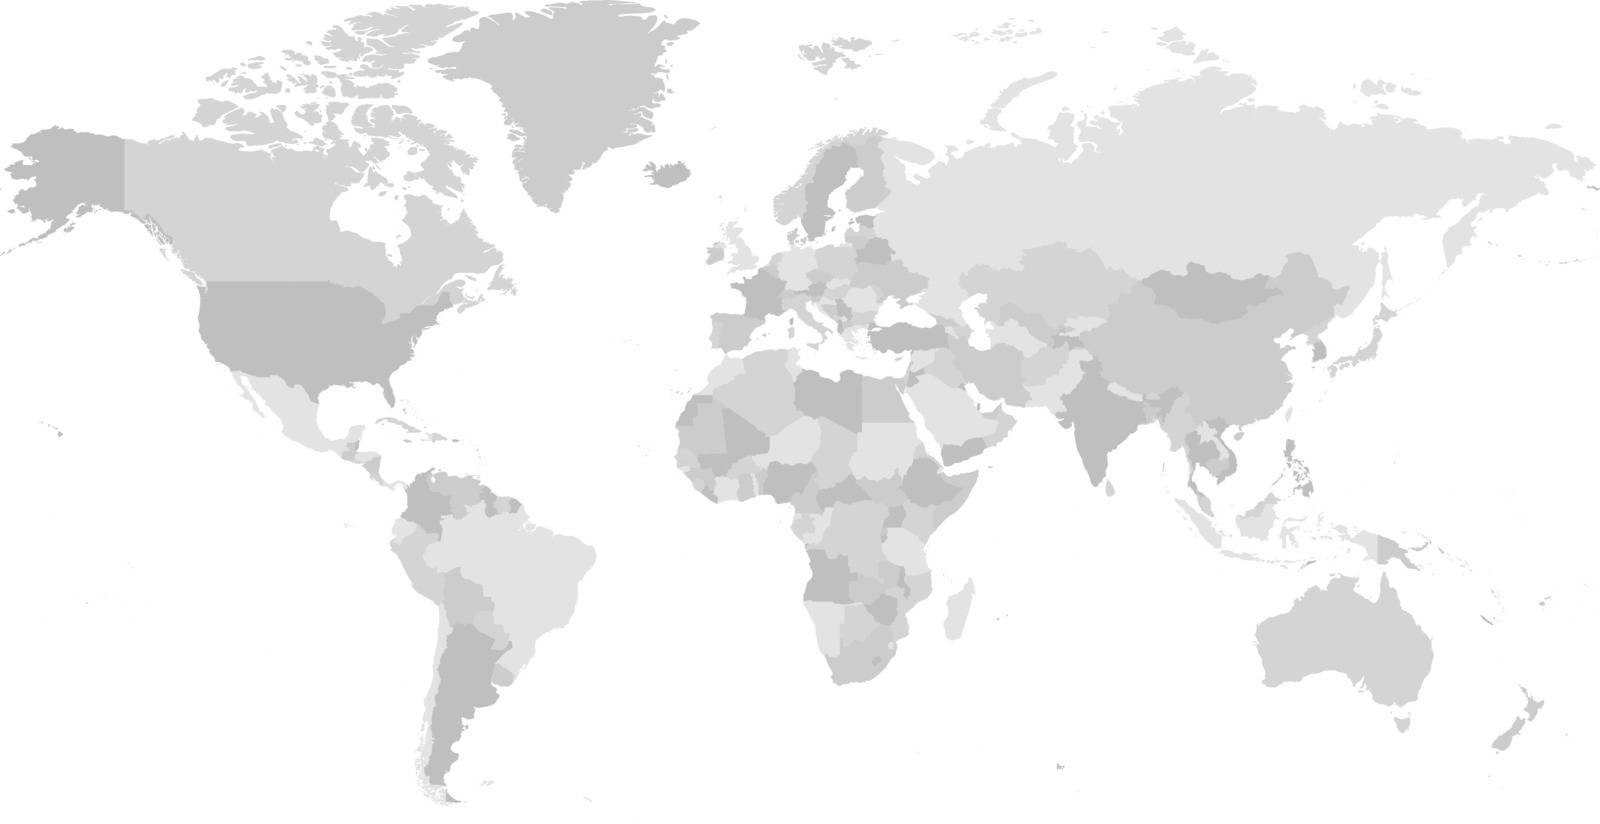 World map in four shades of grey on white background. High detail blank political map. Vector illustration with labeled compound path of each country.